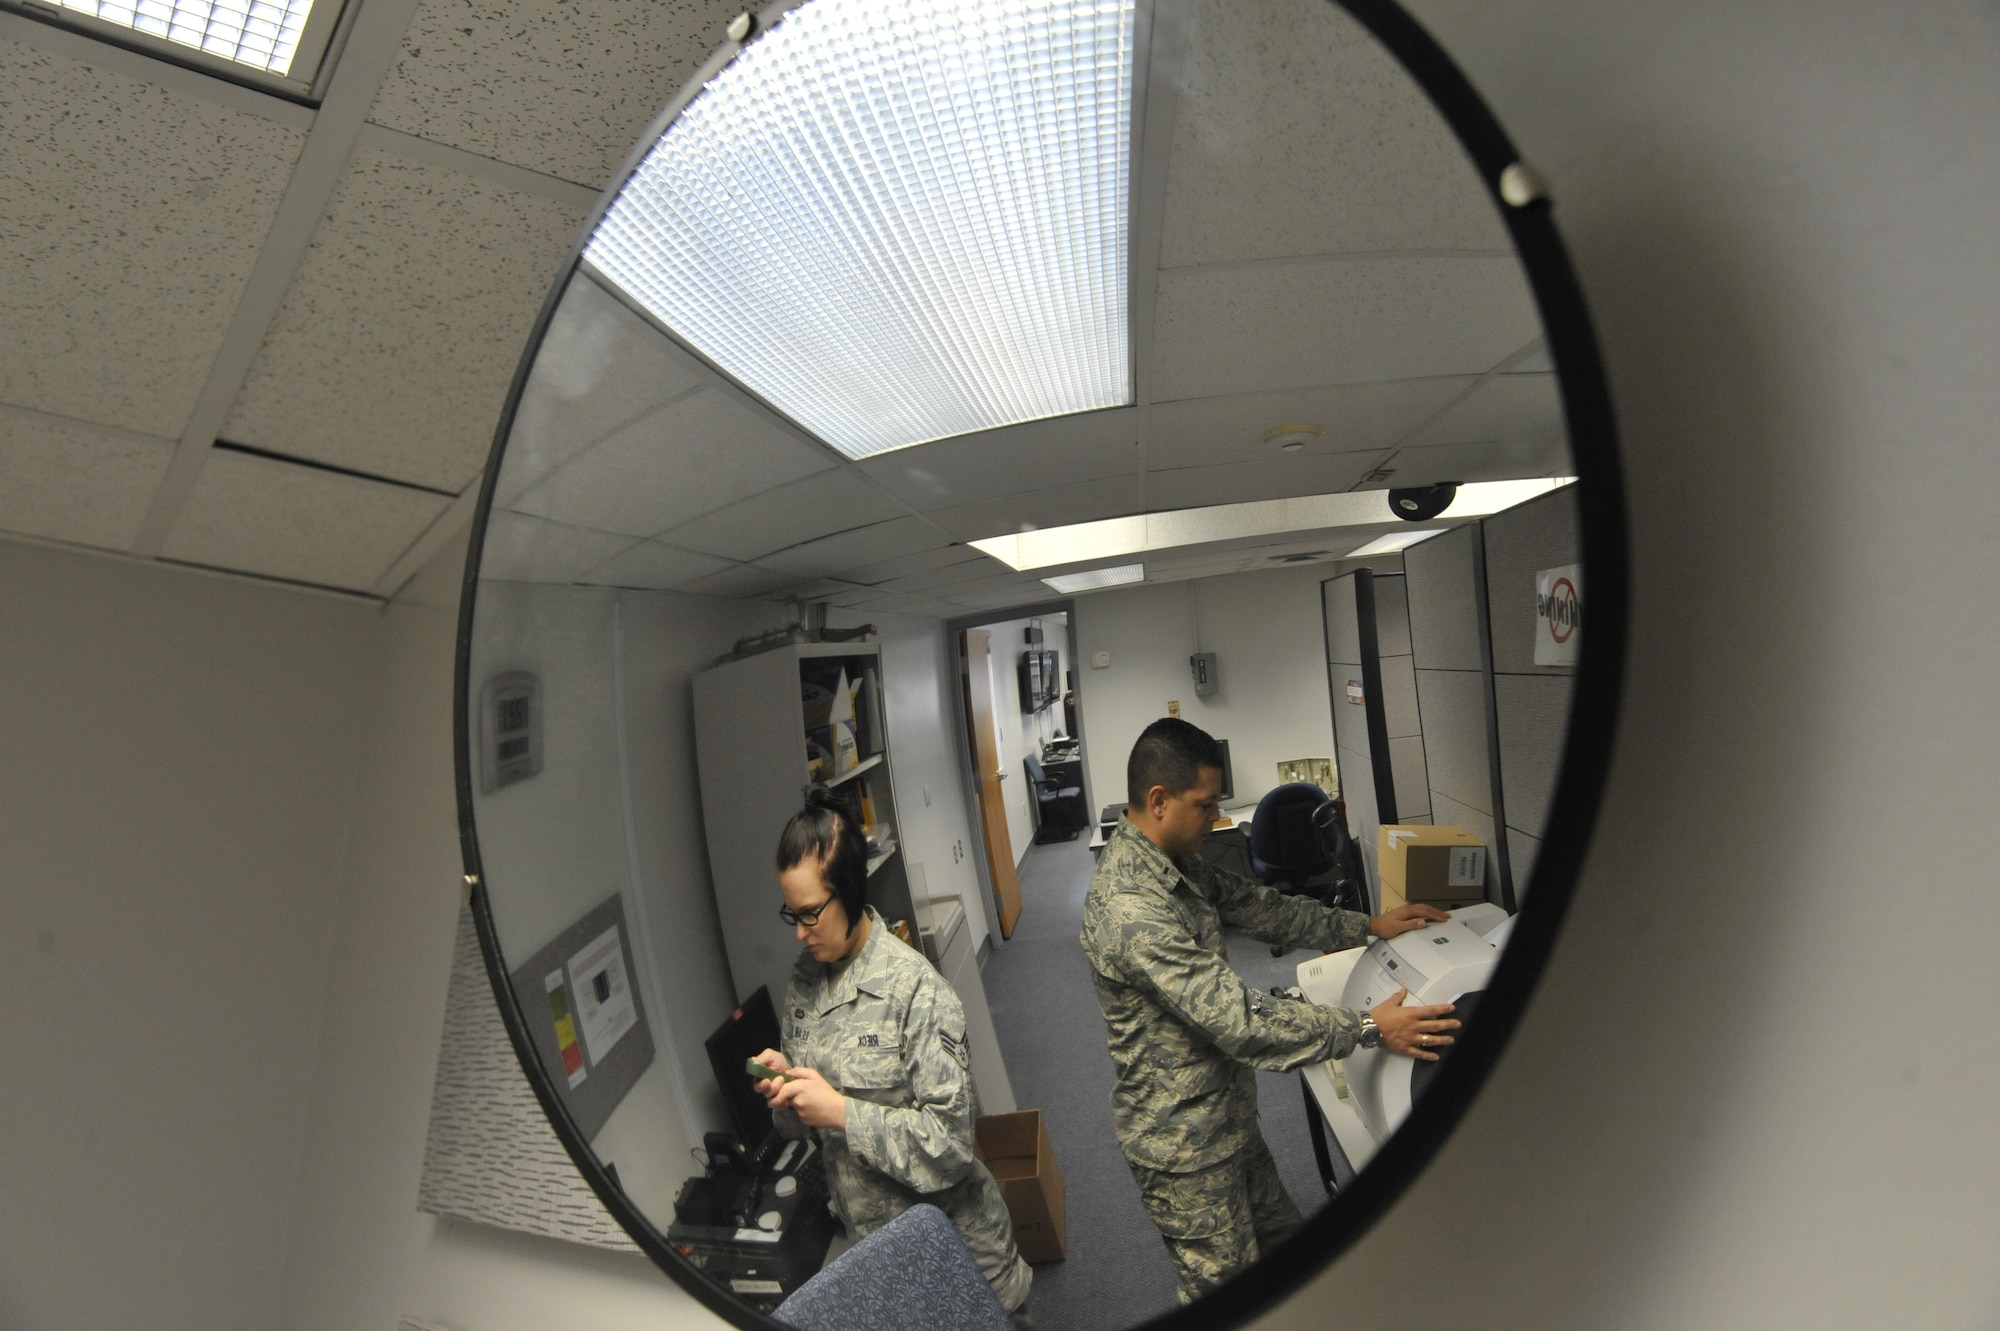 U.S Air Force 1st Lt. Jose Melendez, 509th Operation Support Squadron wing weather officer, (right) and U.S. Air Force Senior Airman Heather Rieck, 509th Operation Support Squadron weather journeyman, work in the weather office, Whiteman Air Force Base, Mo., March 20, 2013. Weather personnel have to observe the weather at all times in case it changes  in a way that may  impact the 
Whiteman mission. (U.S. Air Force photo by Airman 1st Class Keenan Berry/Released)   
